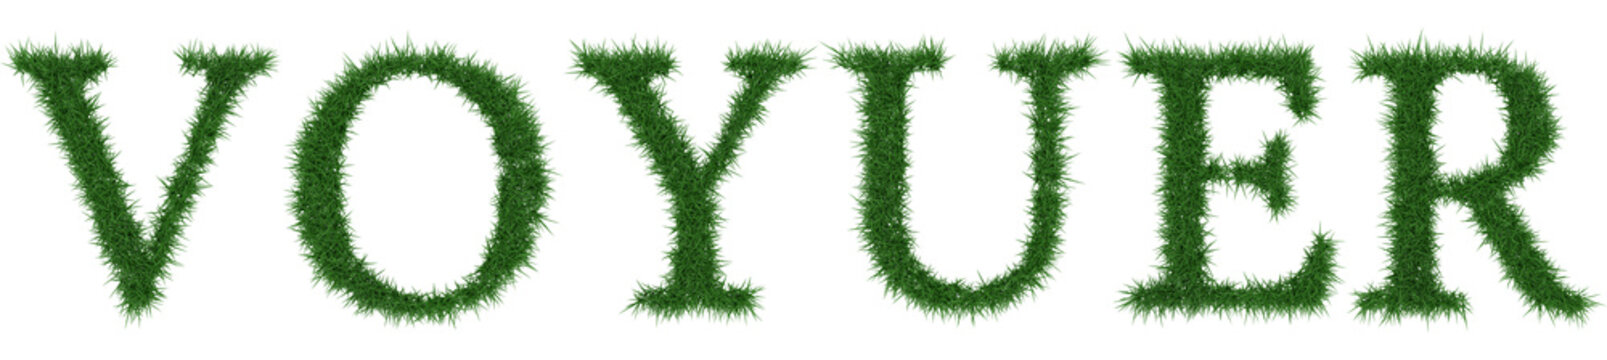 Voyuer - 3D rendering fresh Grass letters isolated on whhite background.